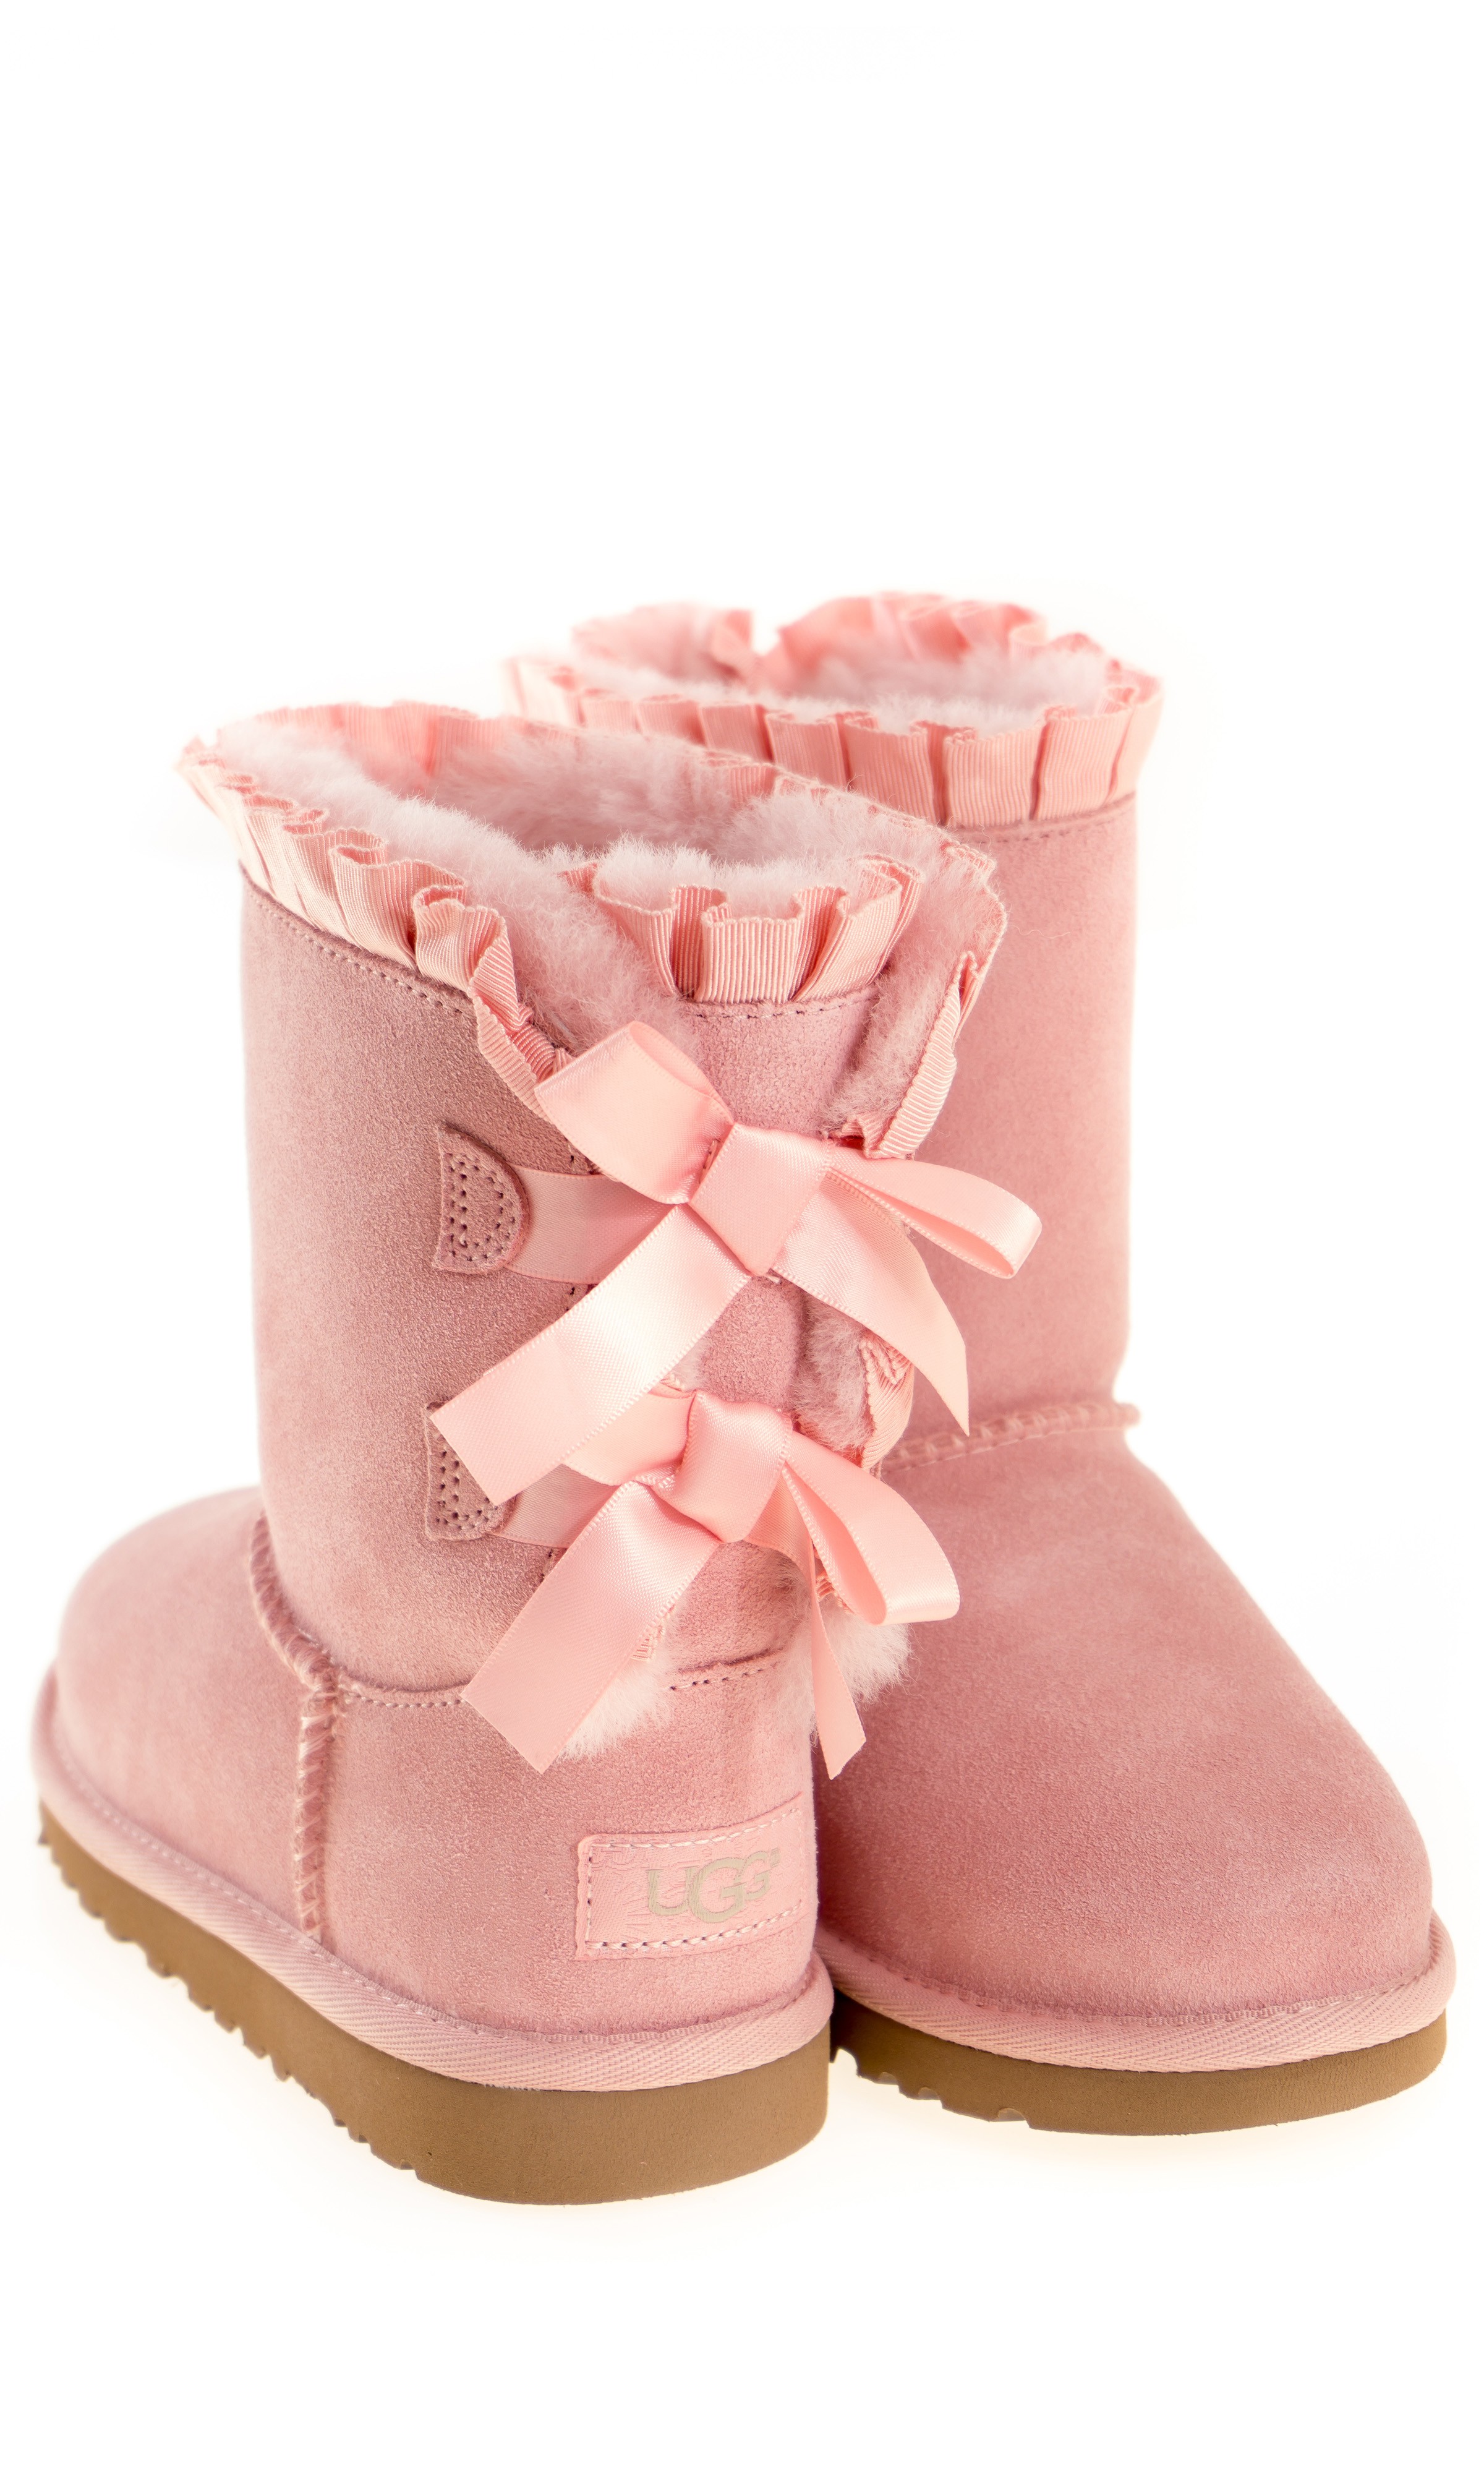 BAILEY BOW RUFFLES pink boots, UGG 